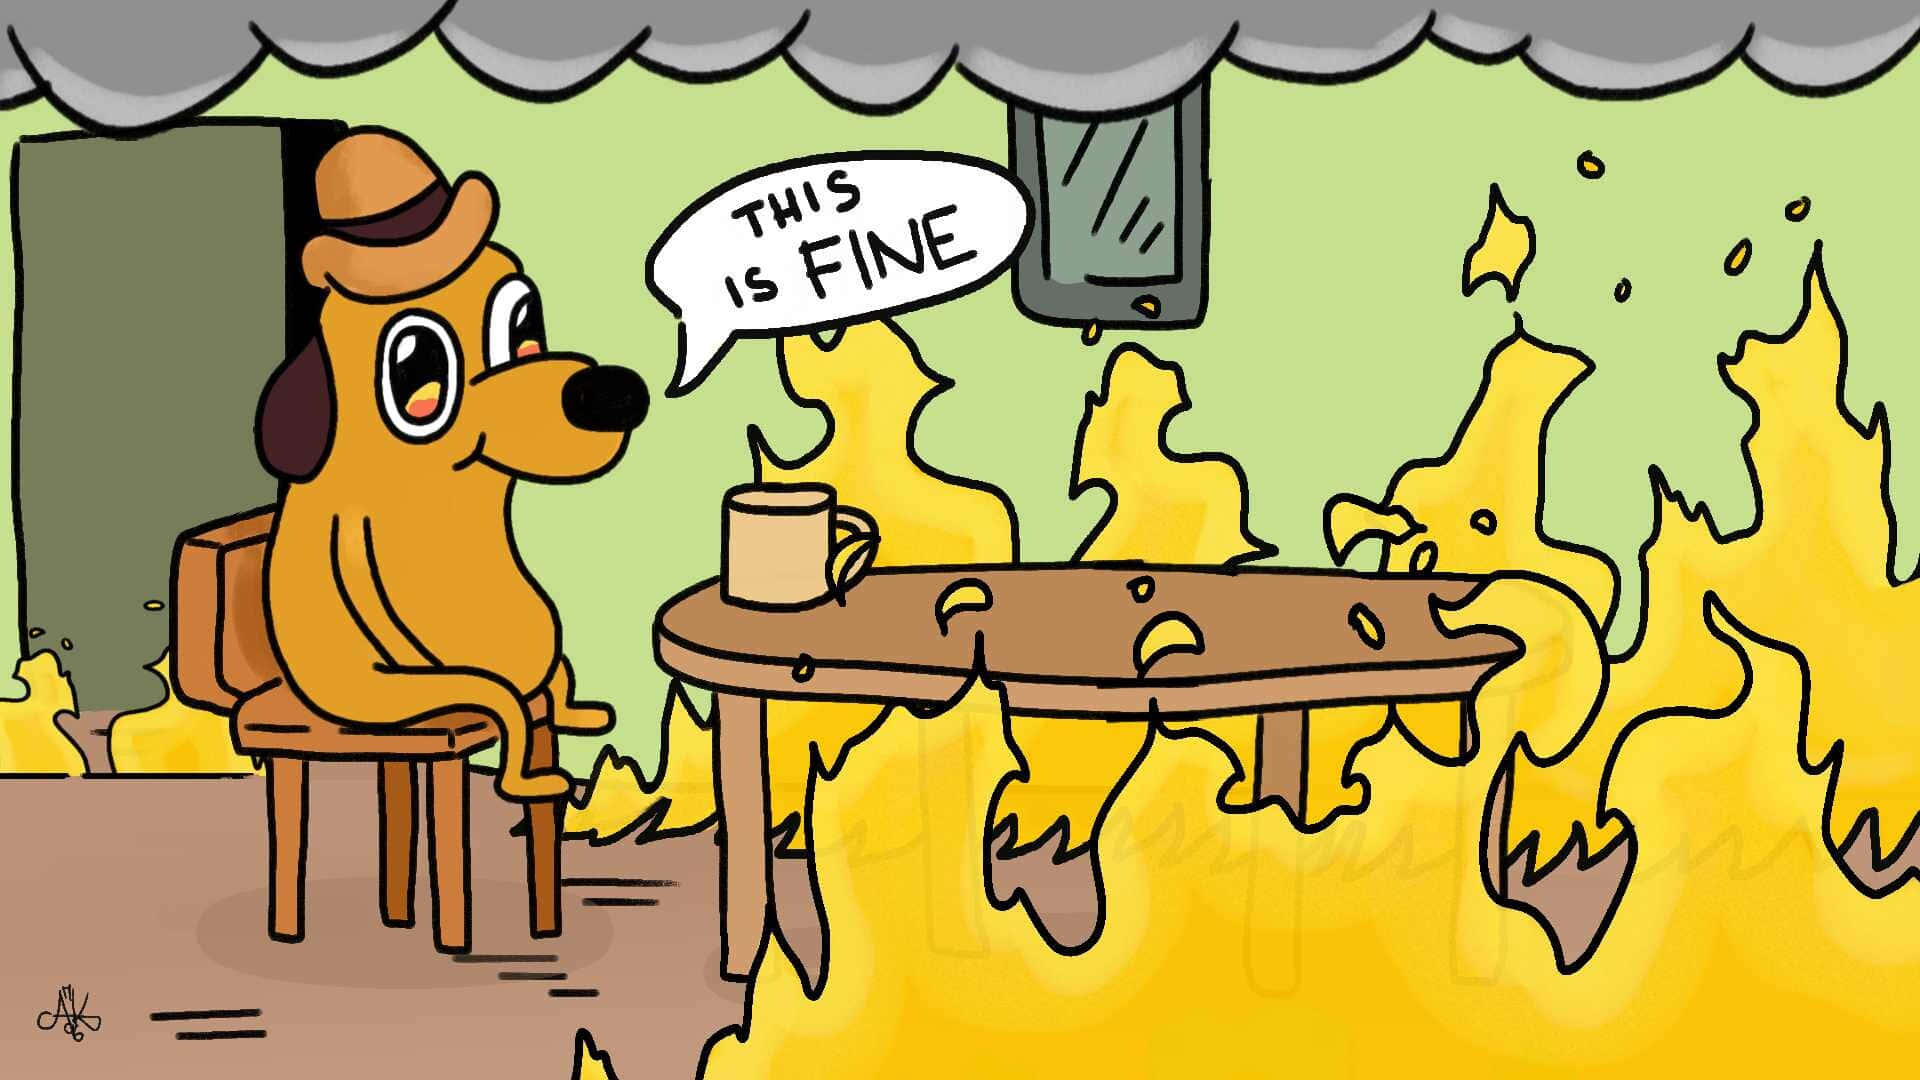 100+] This Is Fine Wallpapers